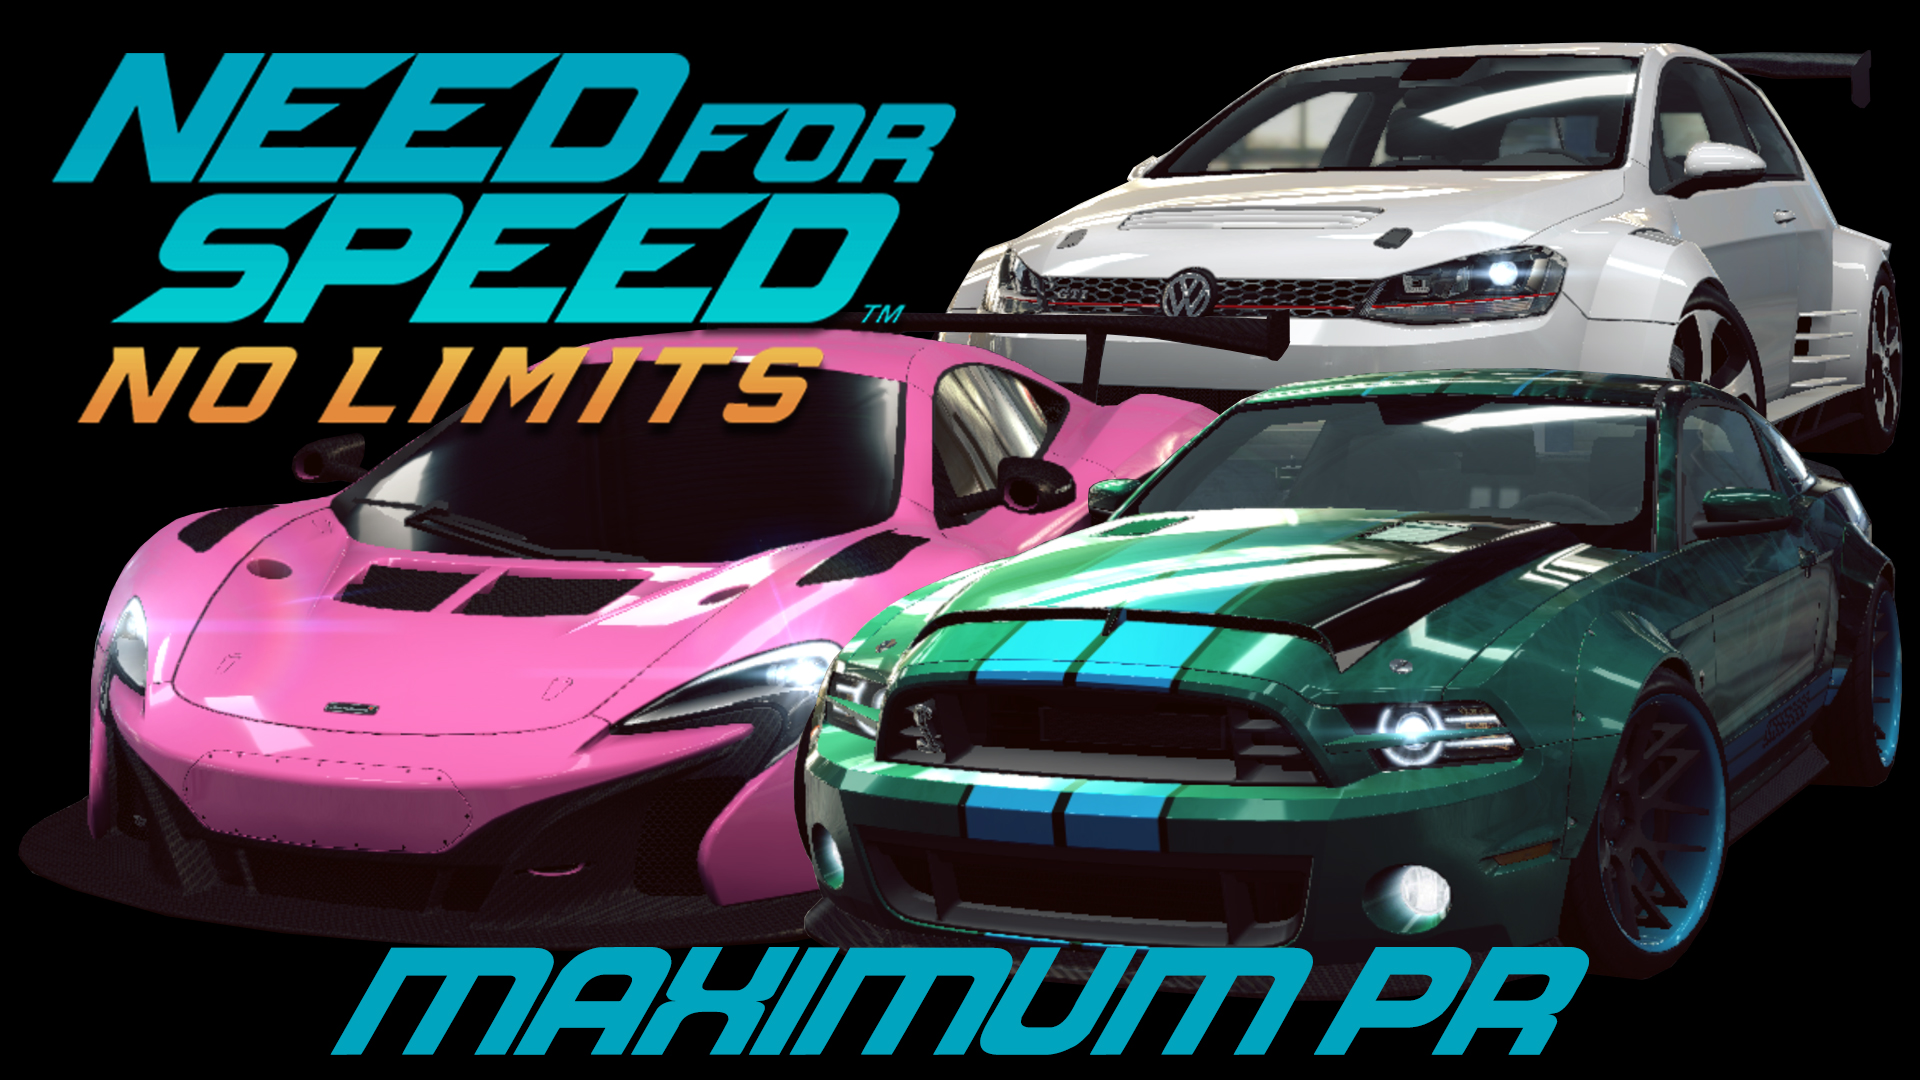 Need For Speed No Limits Cars Maximum PR